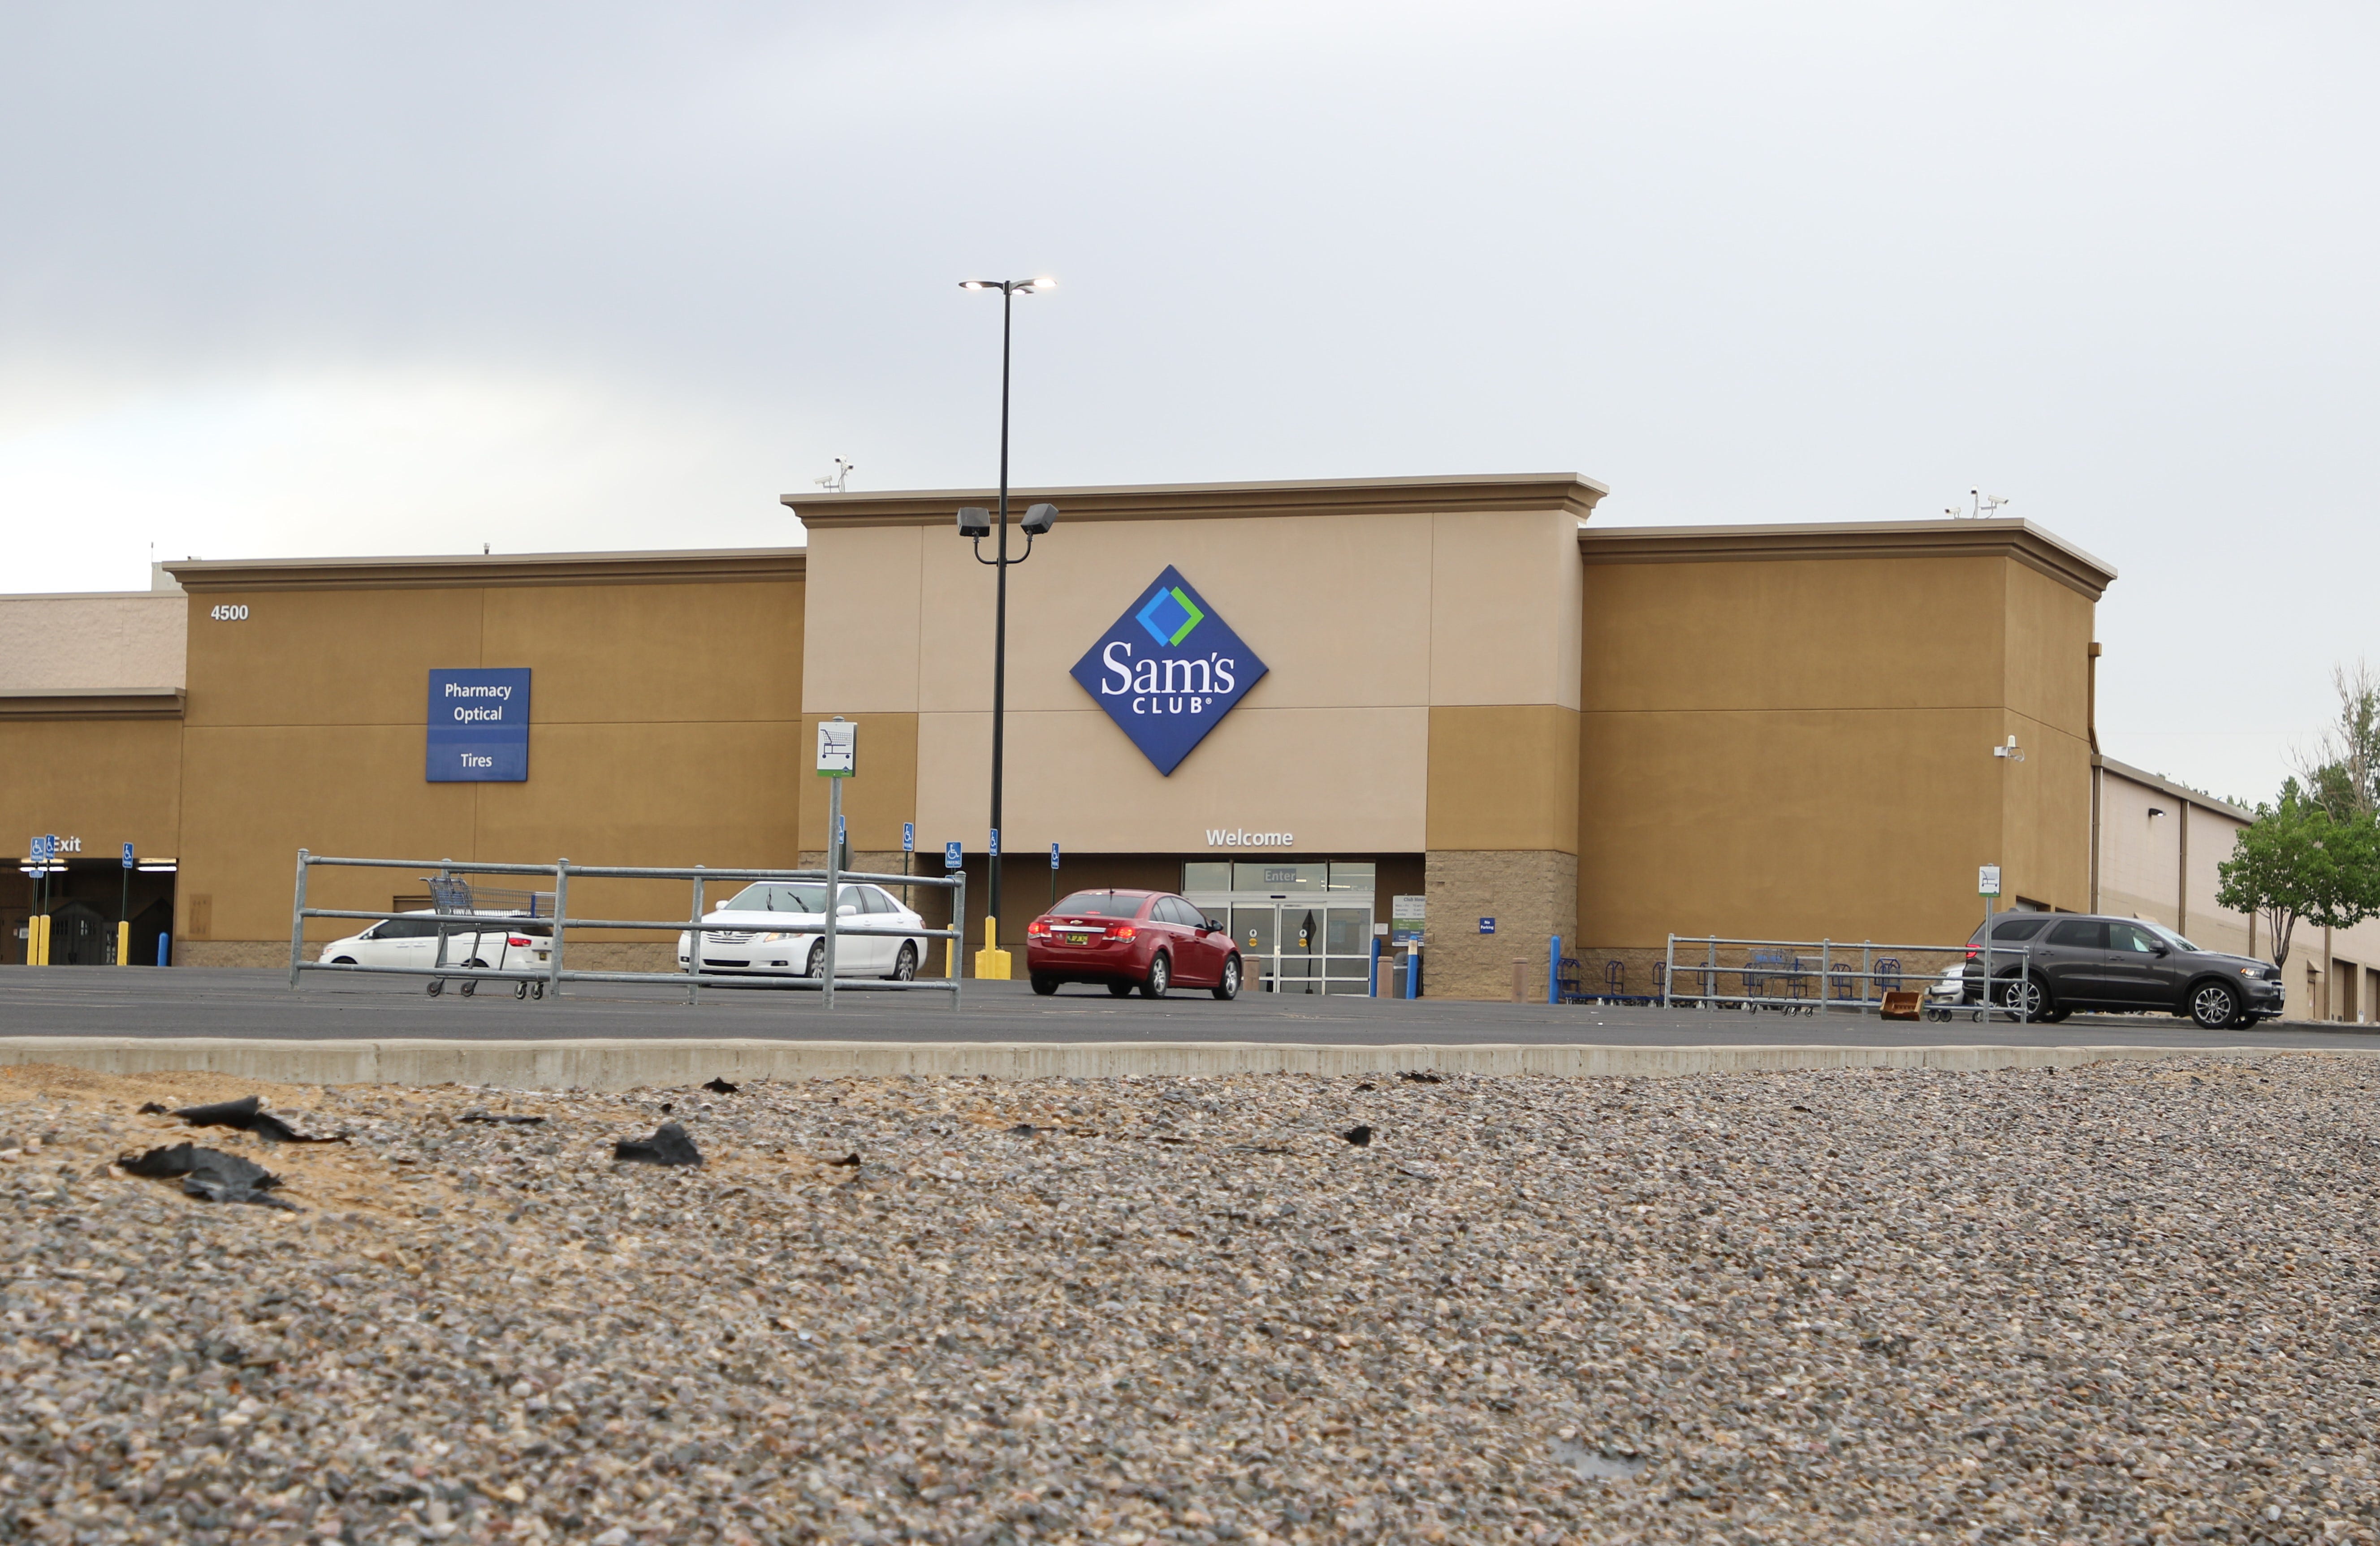 Shoppers leave Sam's Club, 4500 E. Main Street, in Farmington after finding out the store closed early on June 1.